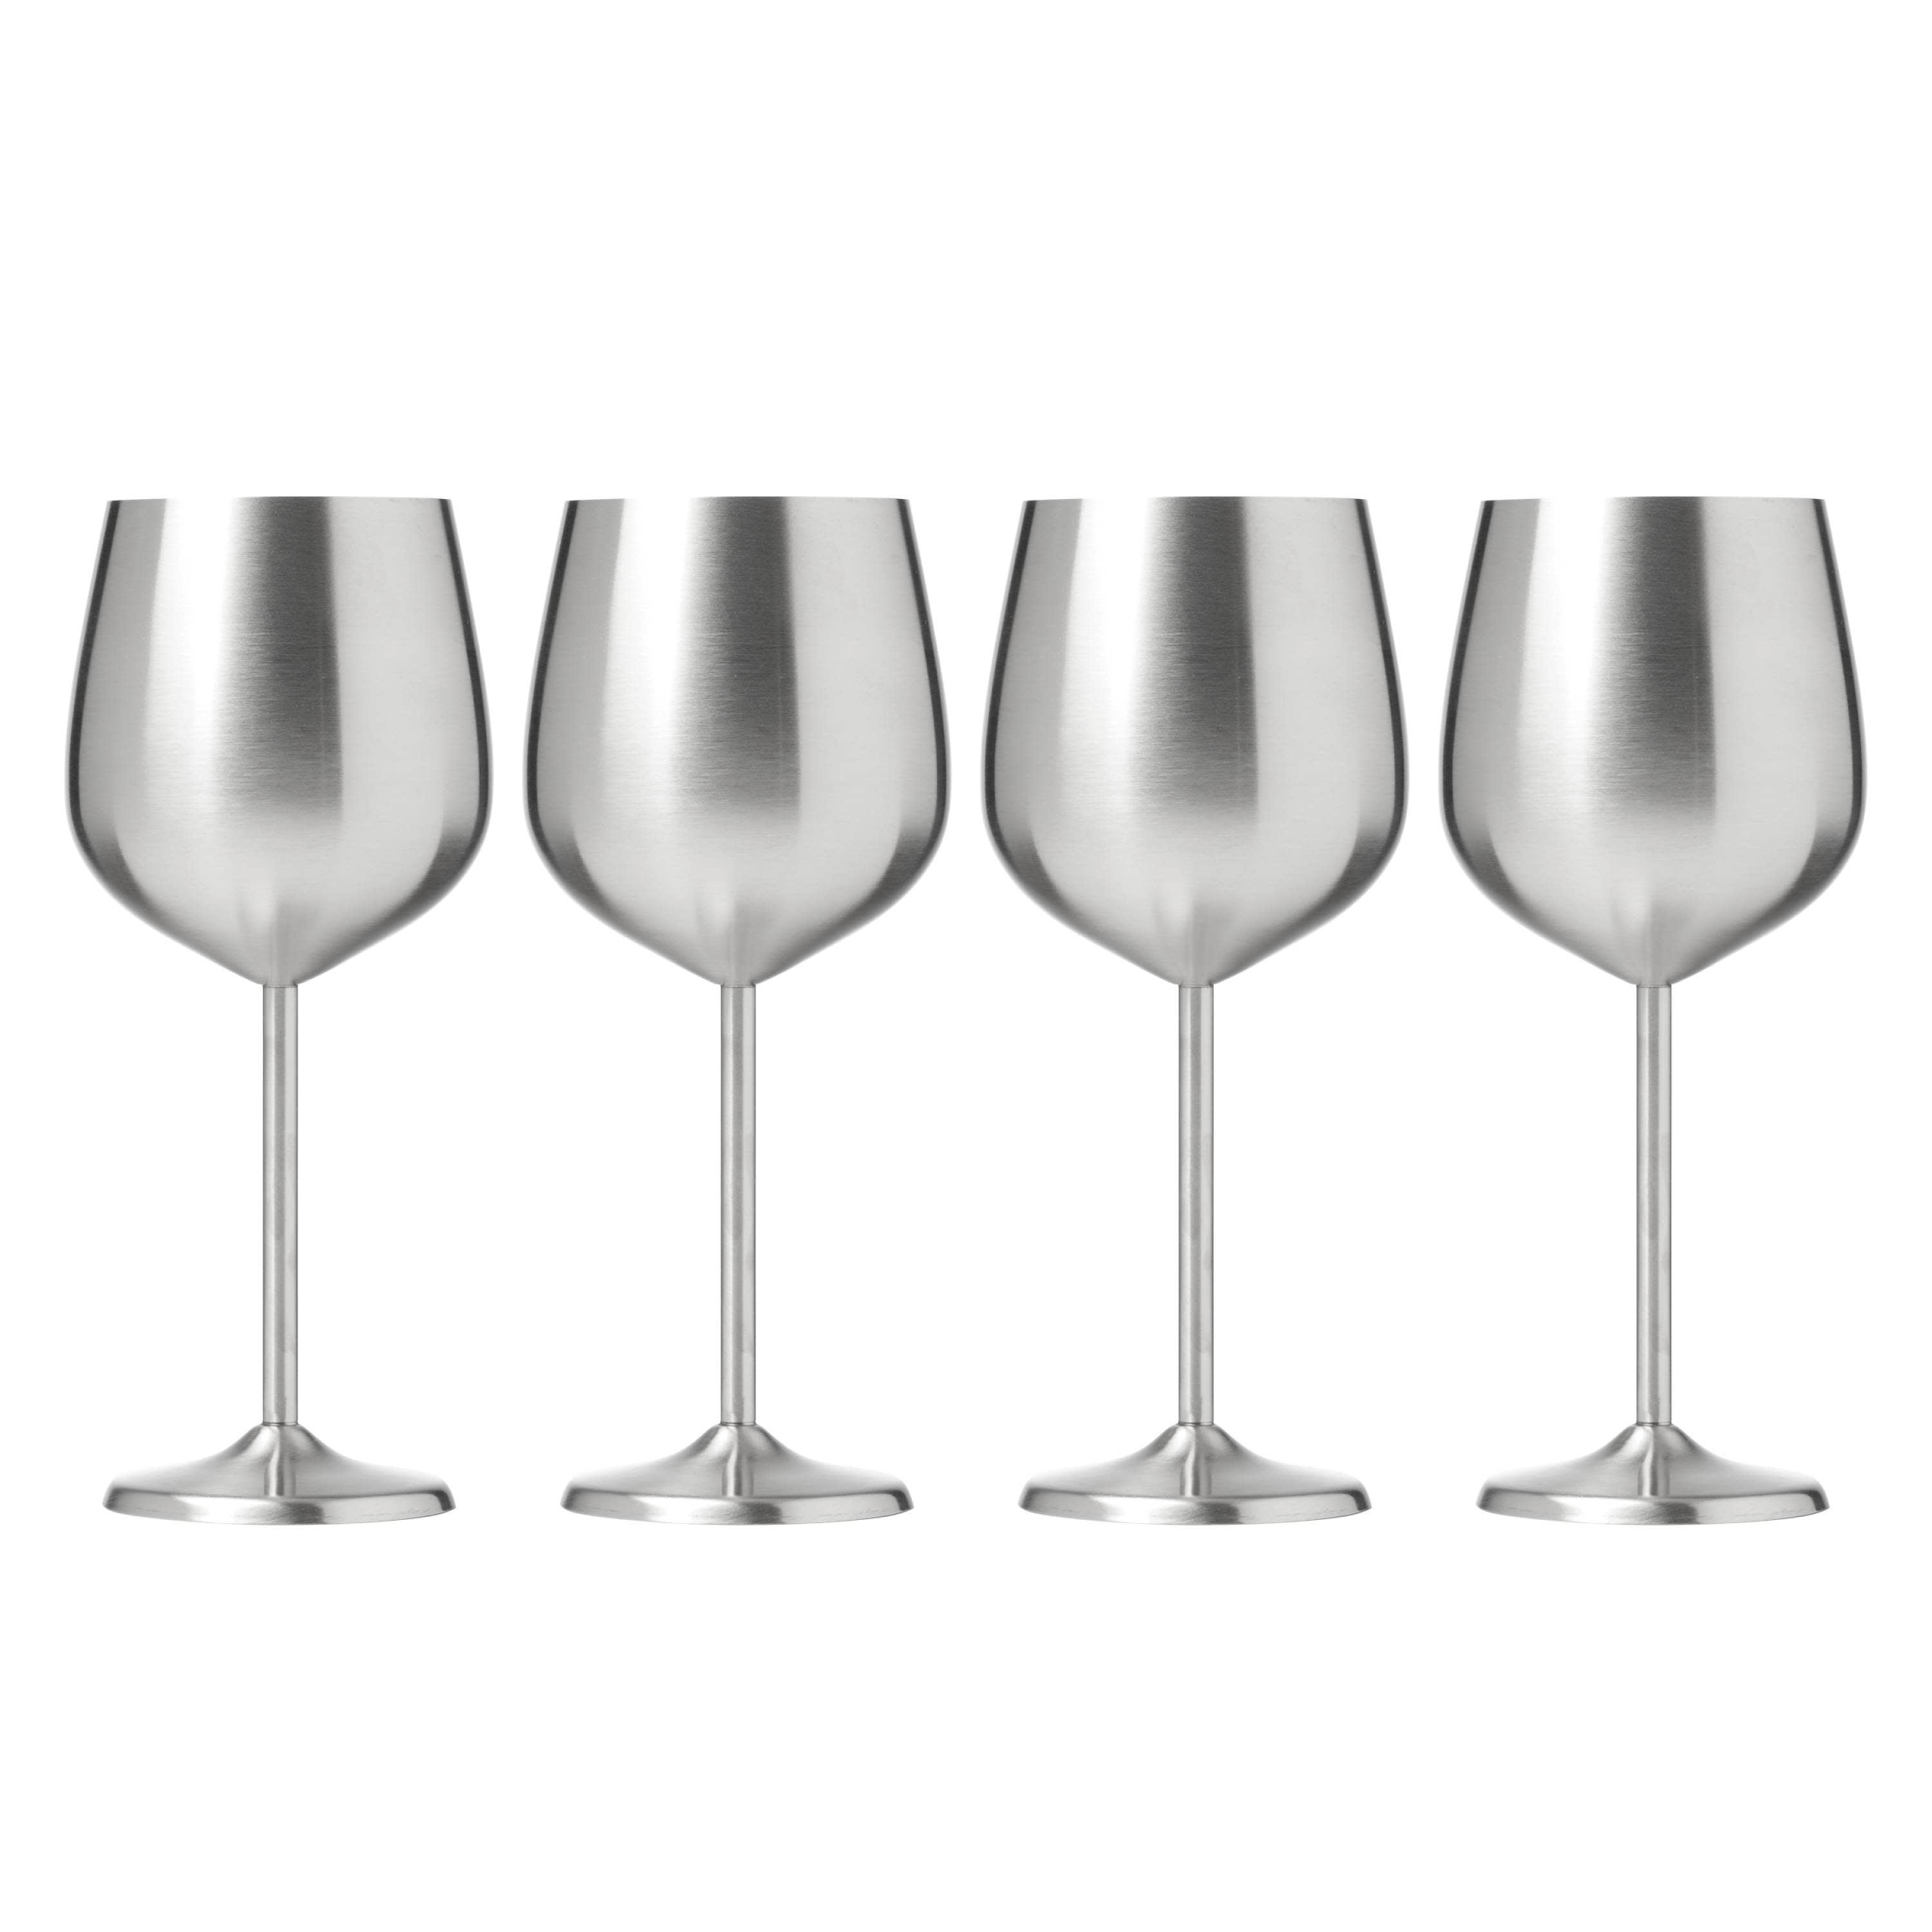 https://ak1.ostkcdn.com/images/products/is/images/direct/a45b001b8fc36c1231f09752135c72d96effbe9d/18-Oz-Stainless-Steel-Wine-Glasses%2C-Set-of-4.jpg